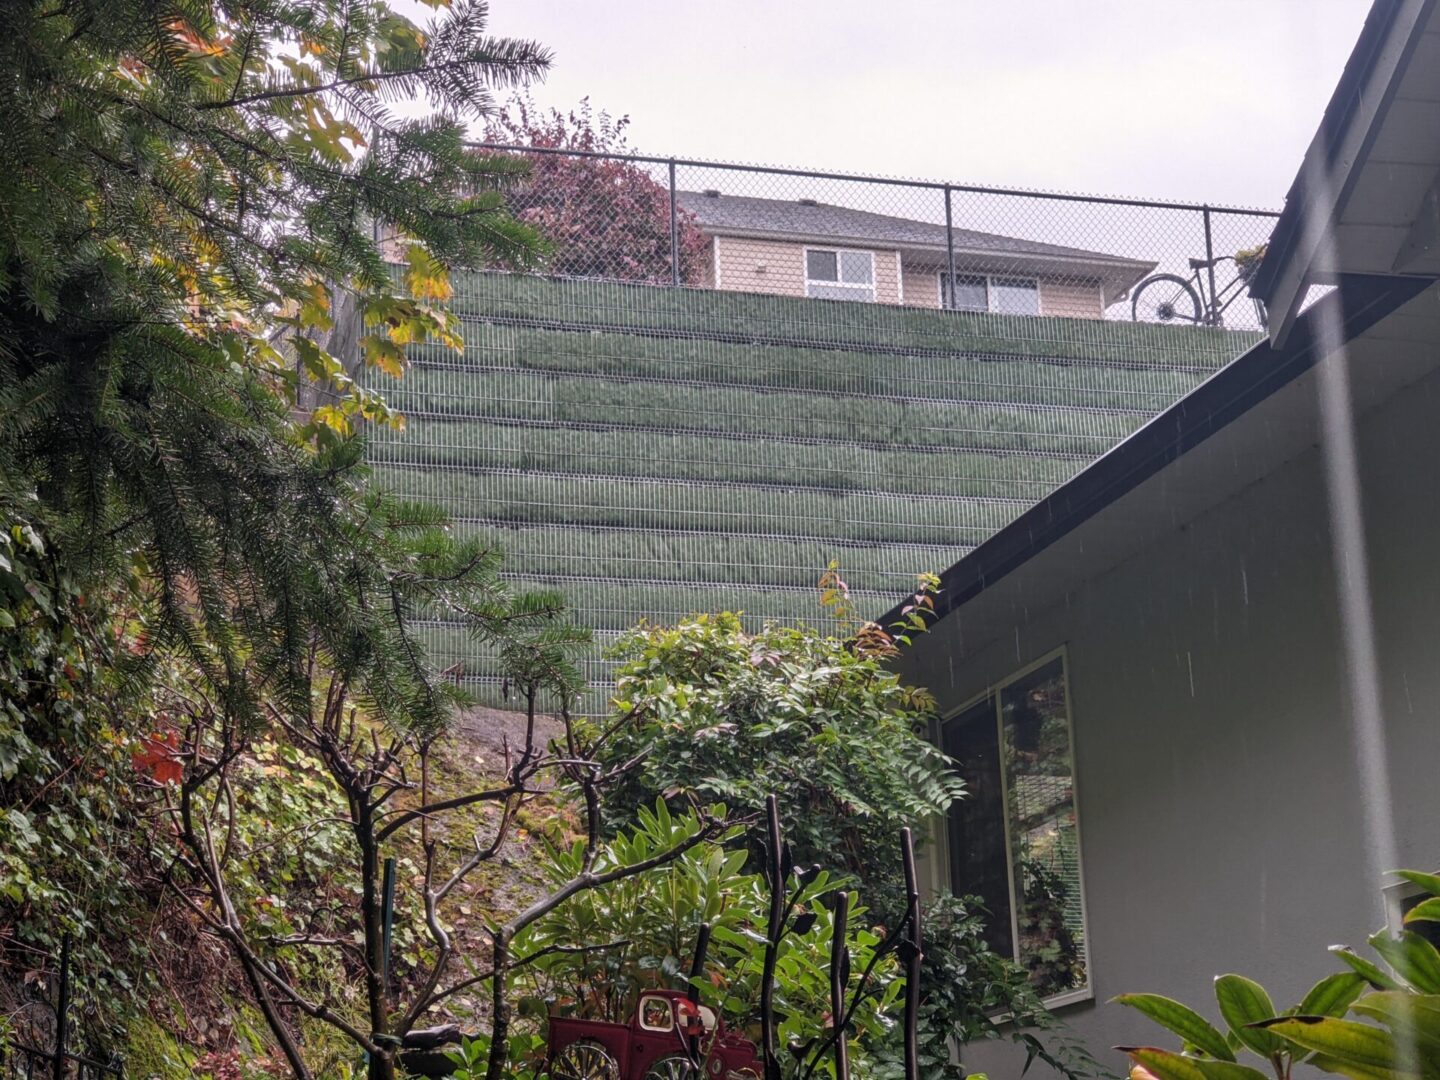 Rain falling on a garden beside a modern house with a view of a hill and a fence topped with barbed wire above.